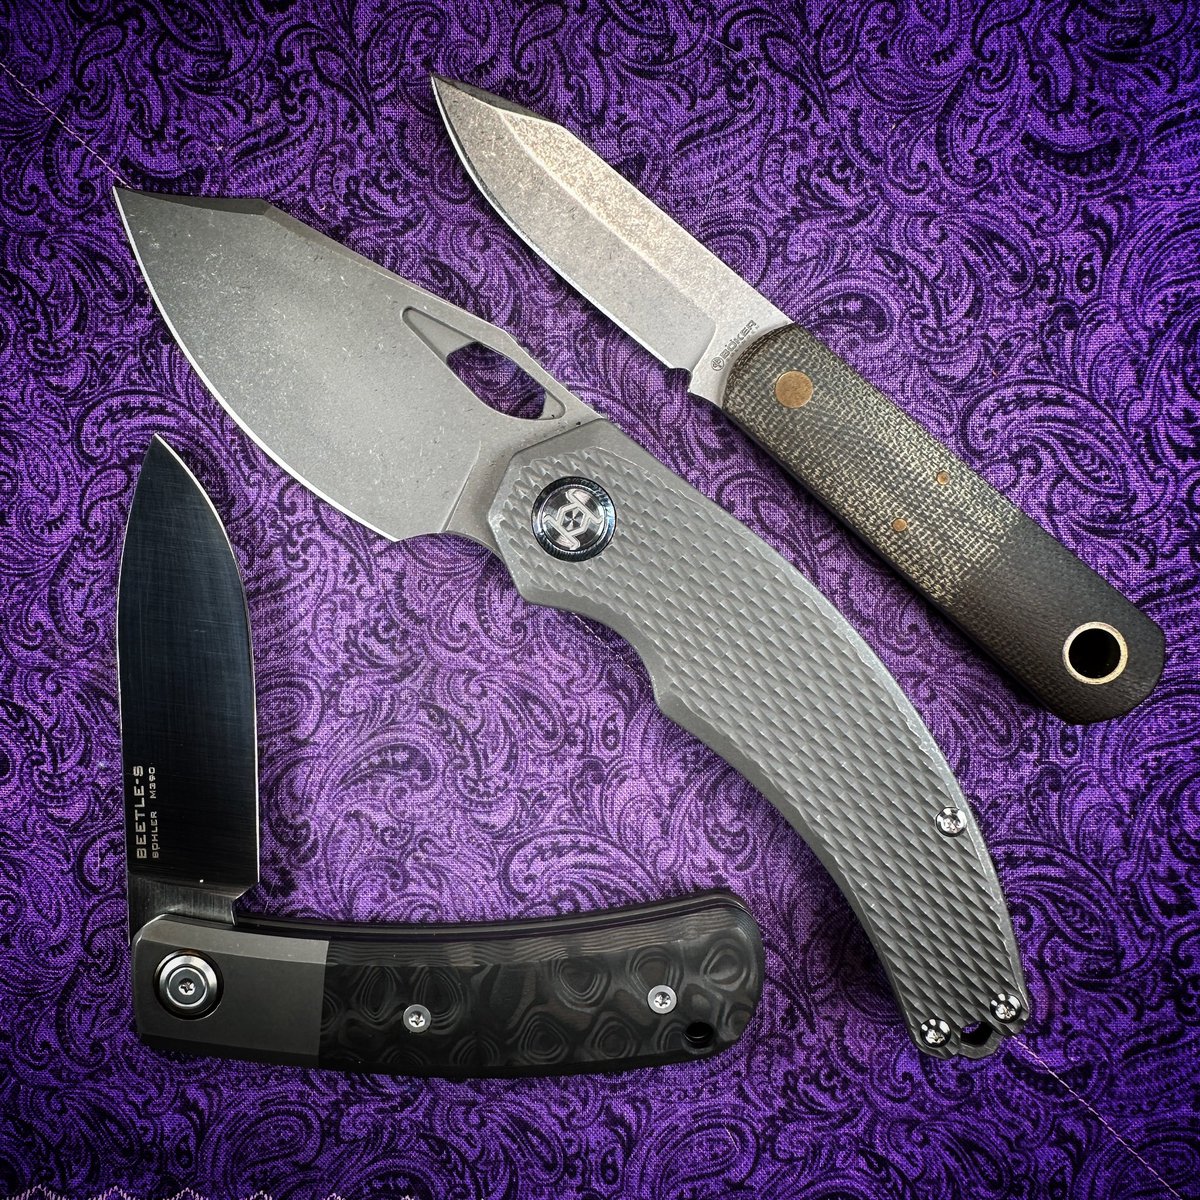 What is in your pockets?
#knife #knifelife #knifecollection #edc